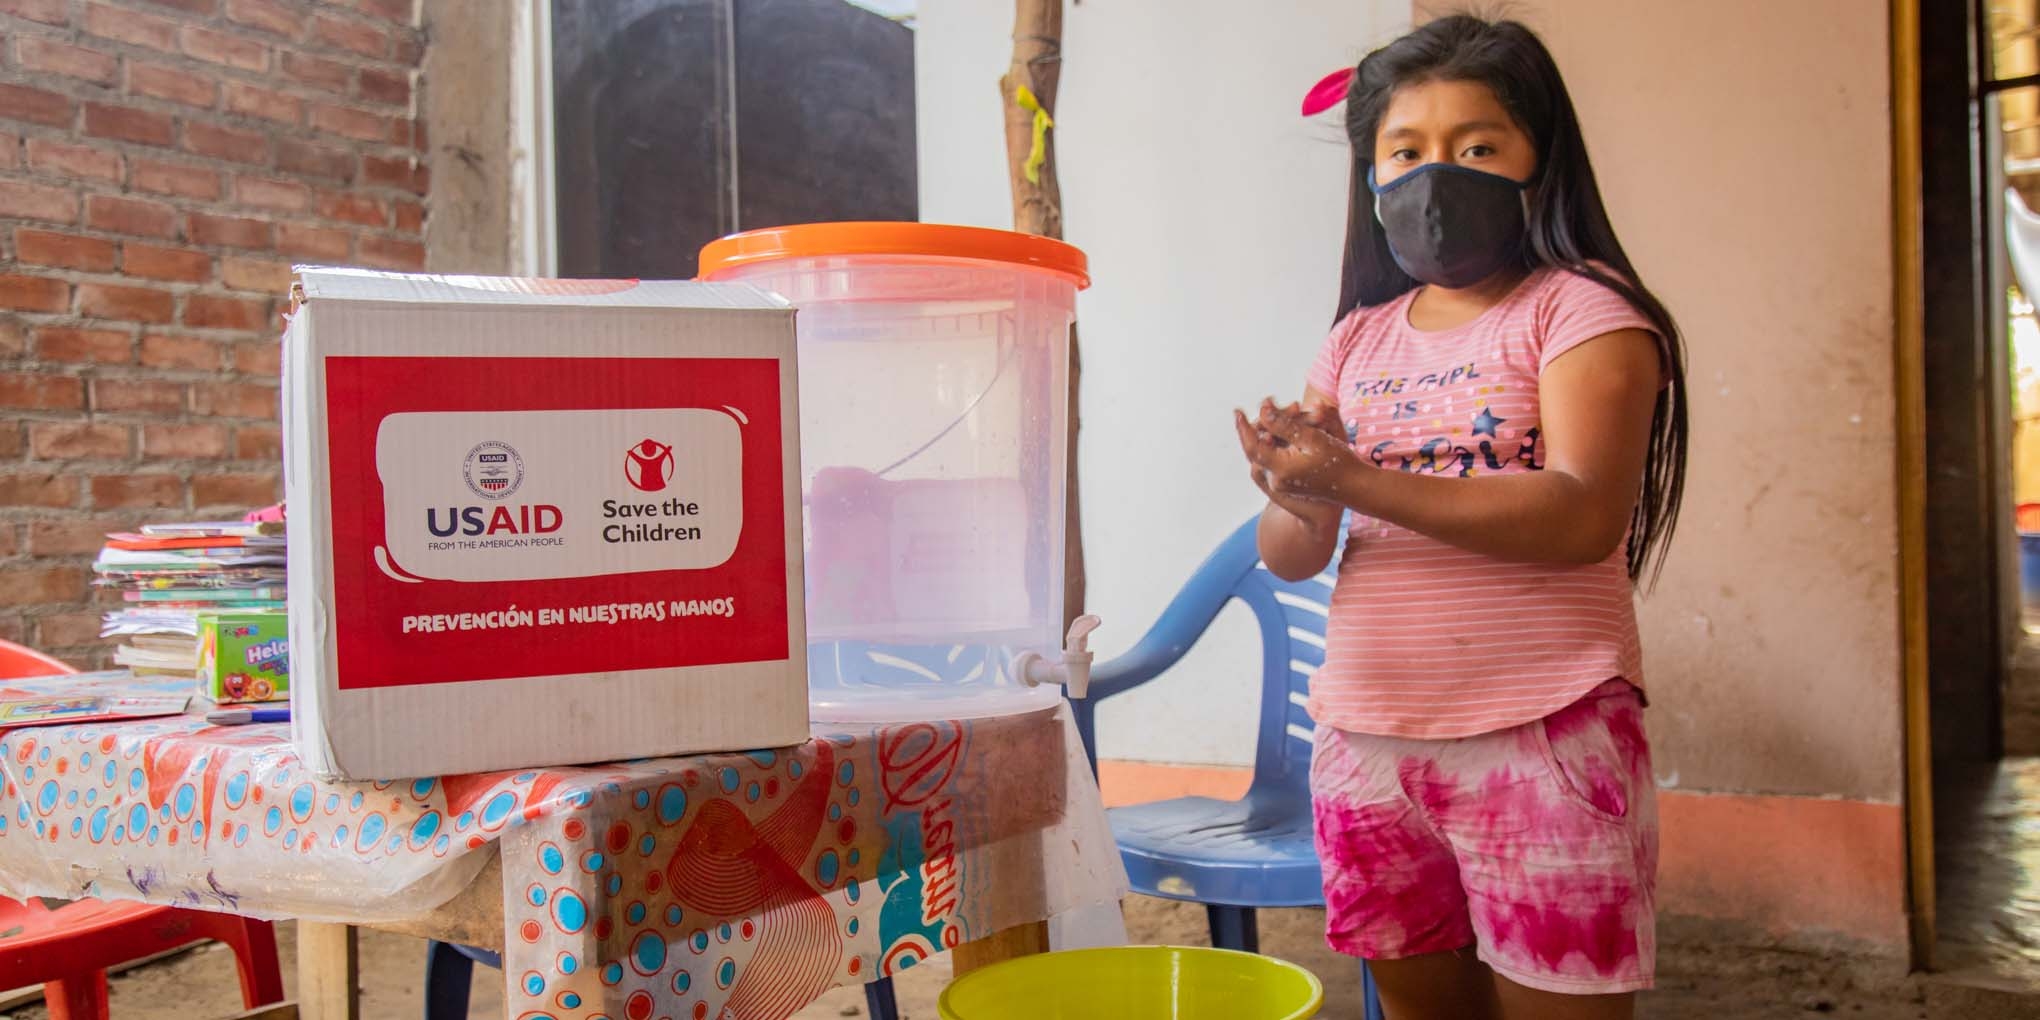 In Peru, Ariana practices handwashing and hygiene with Save the Children and USAID support.